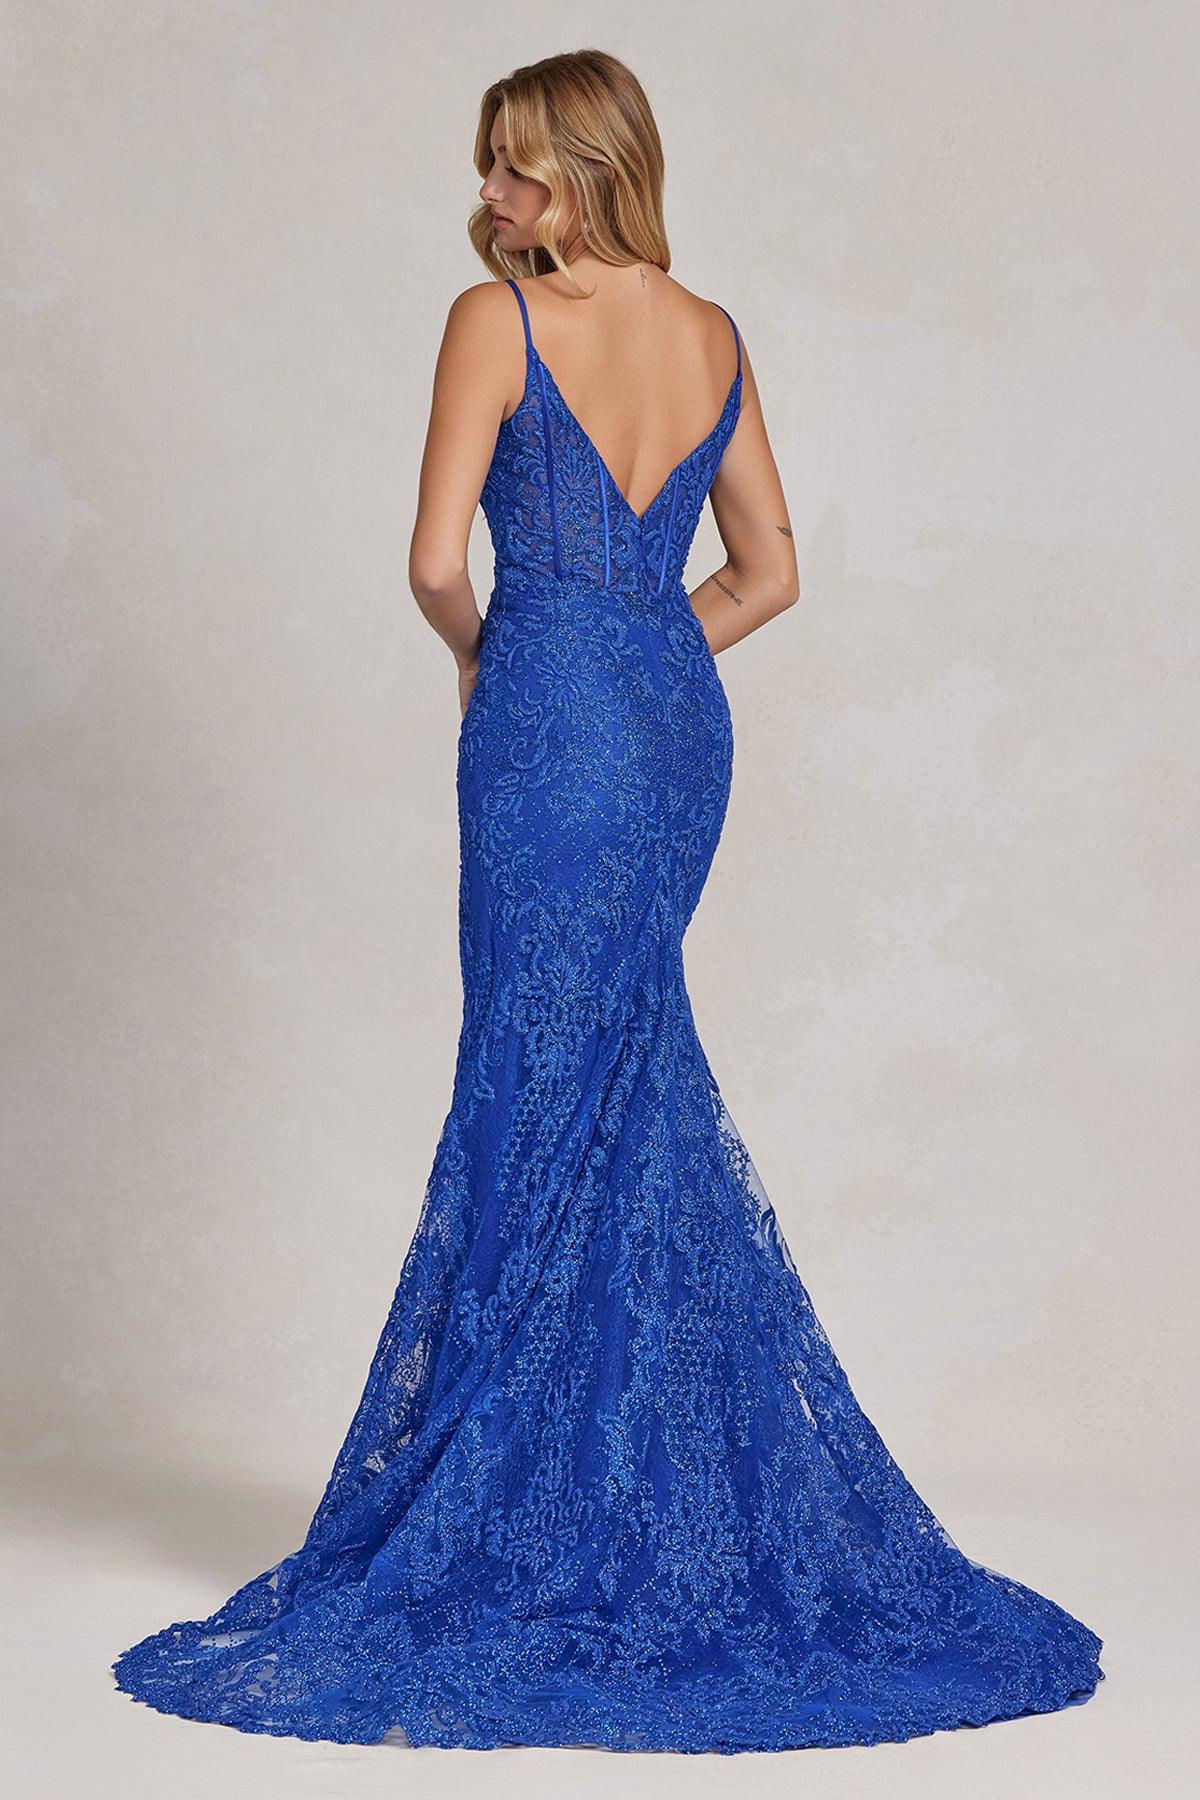 Nox Anabel C1100 Long Spaghetti Strap Sexy Prom Gown